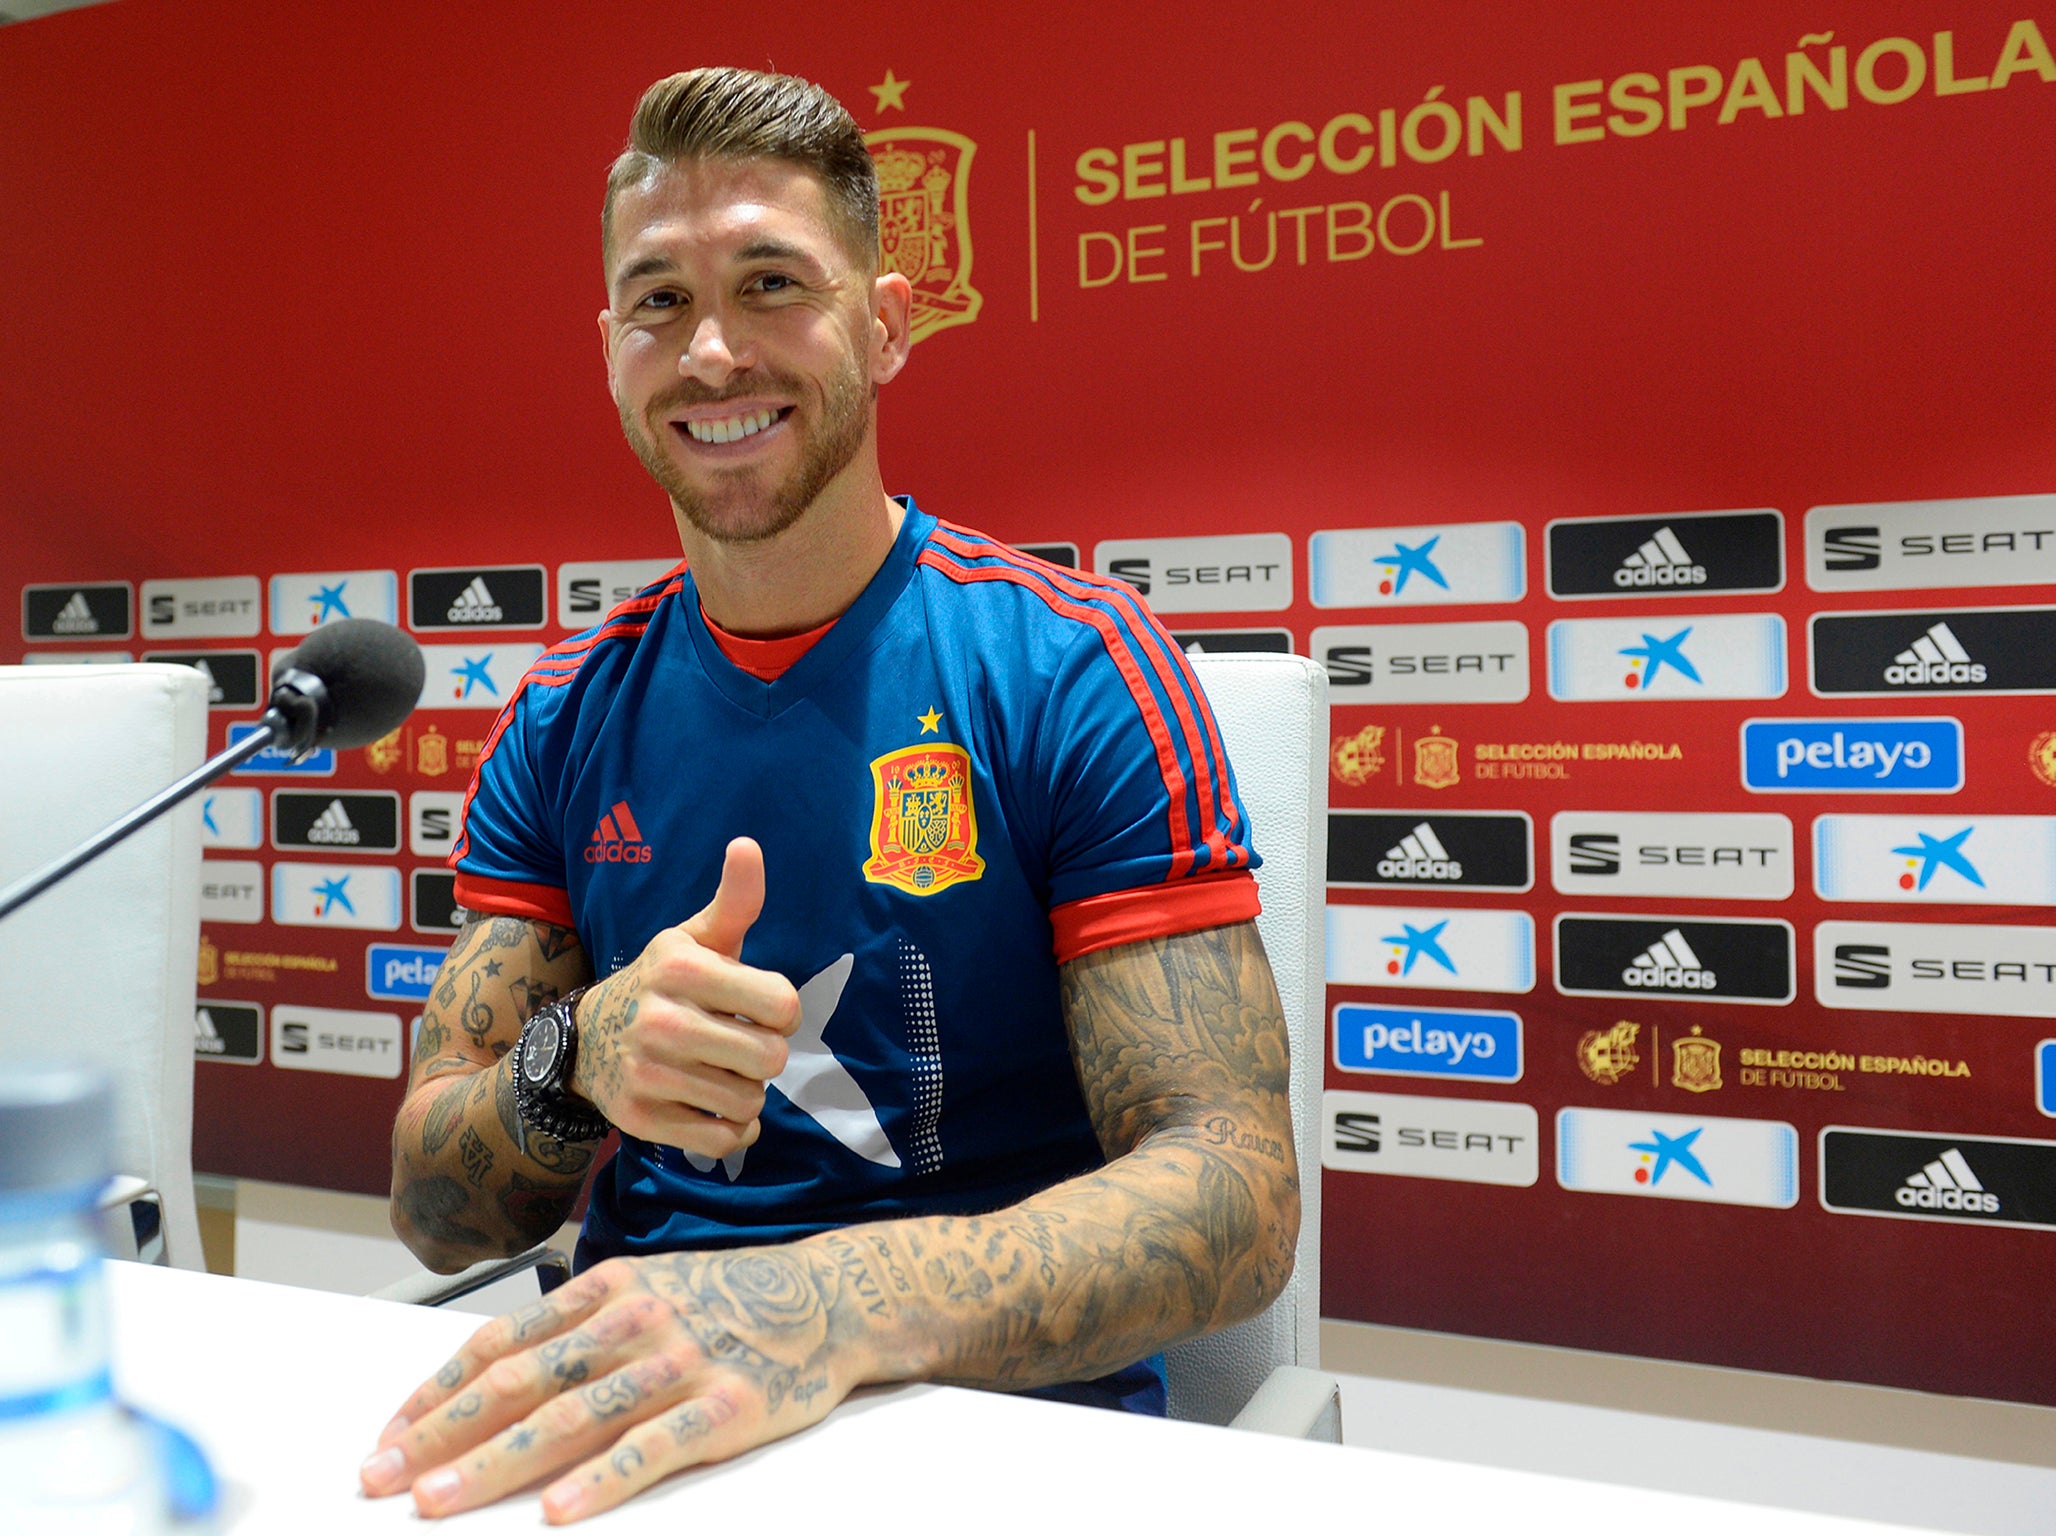 Sergio Ramos will feature against England